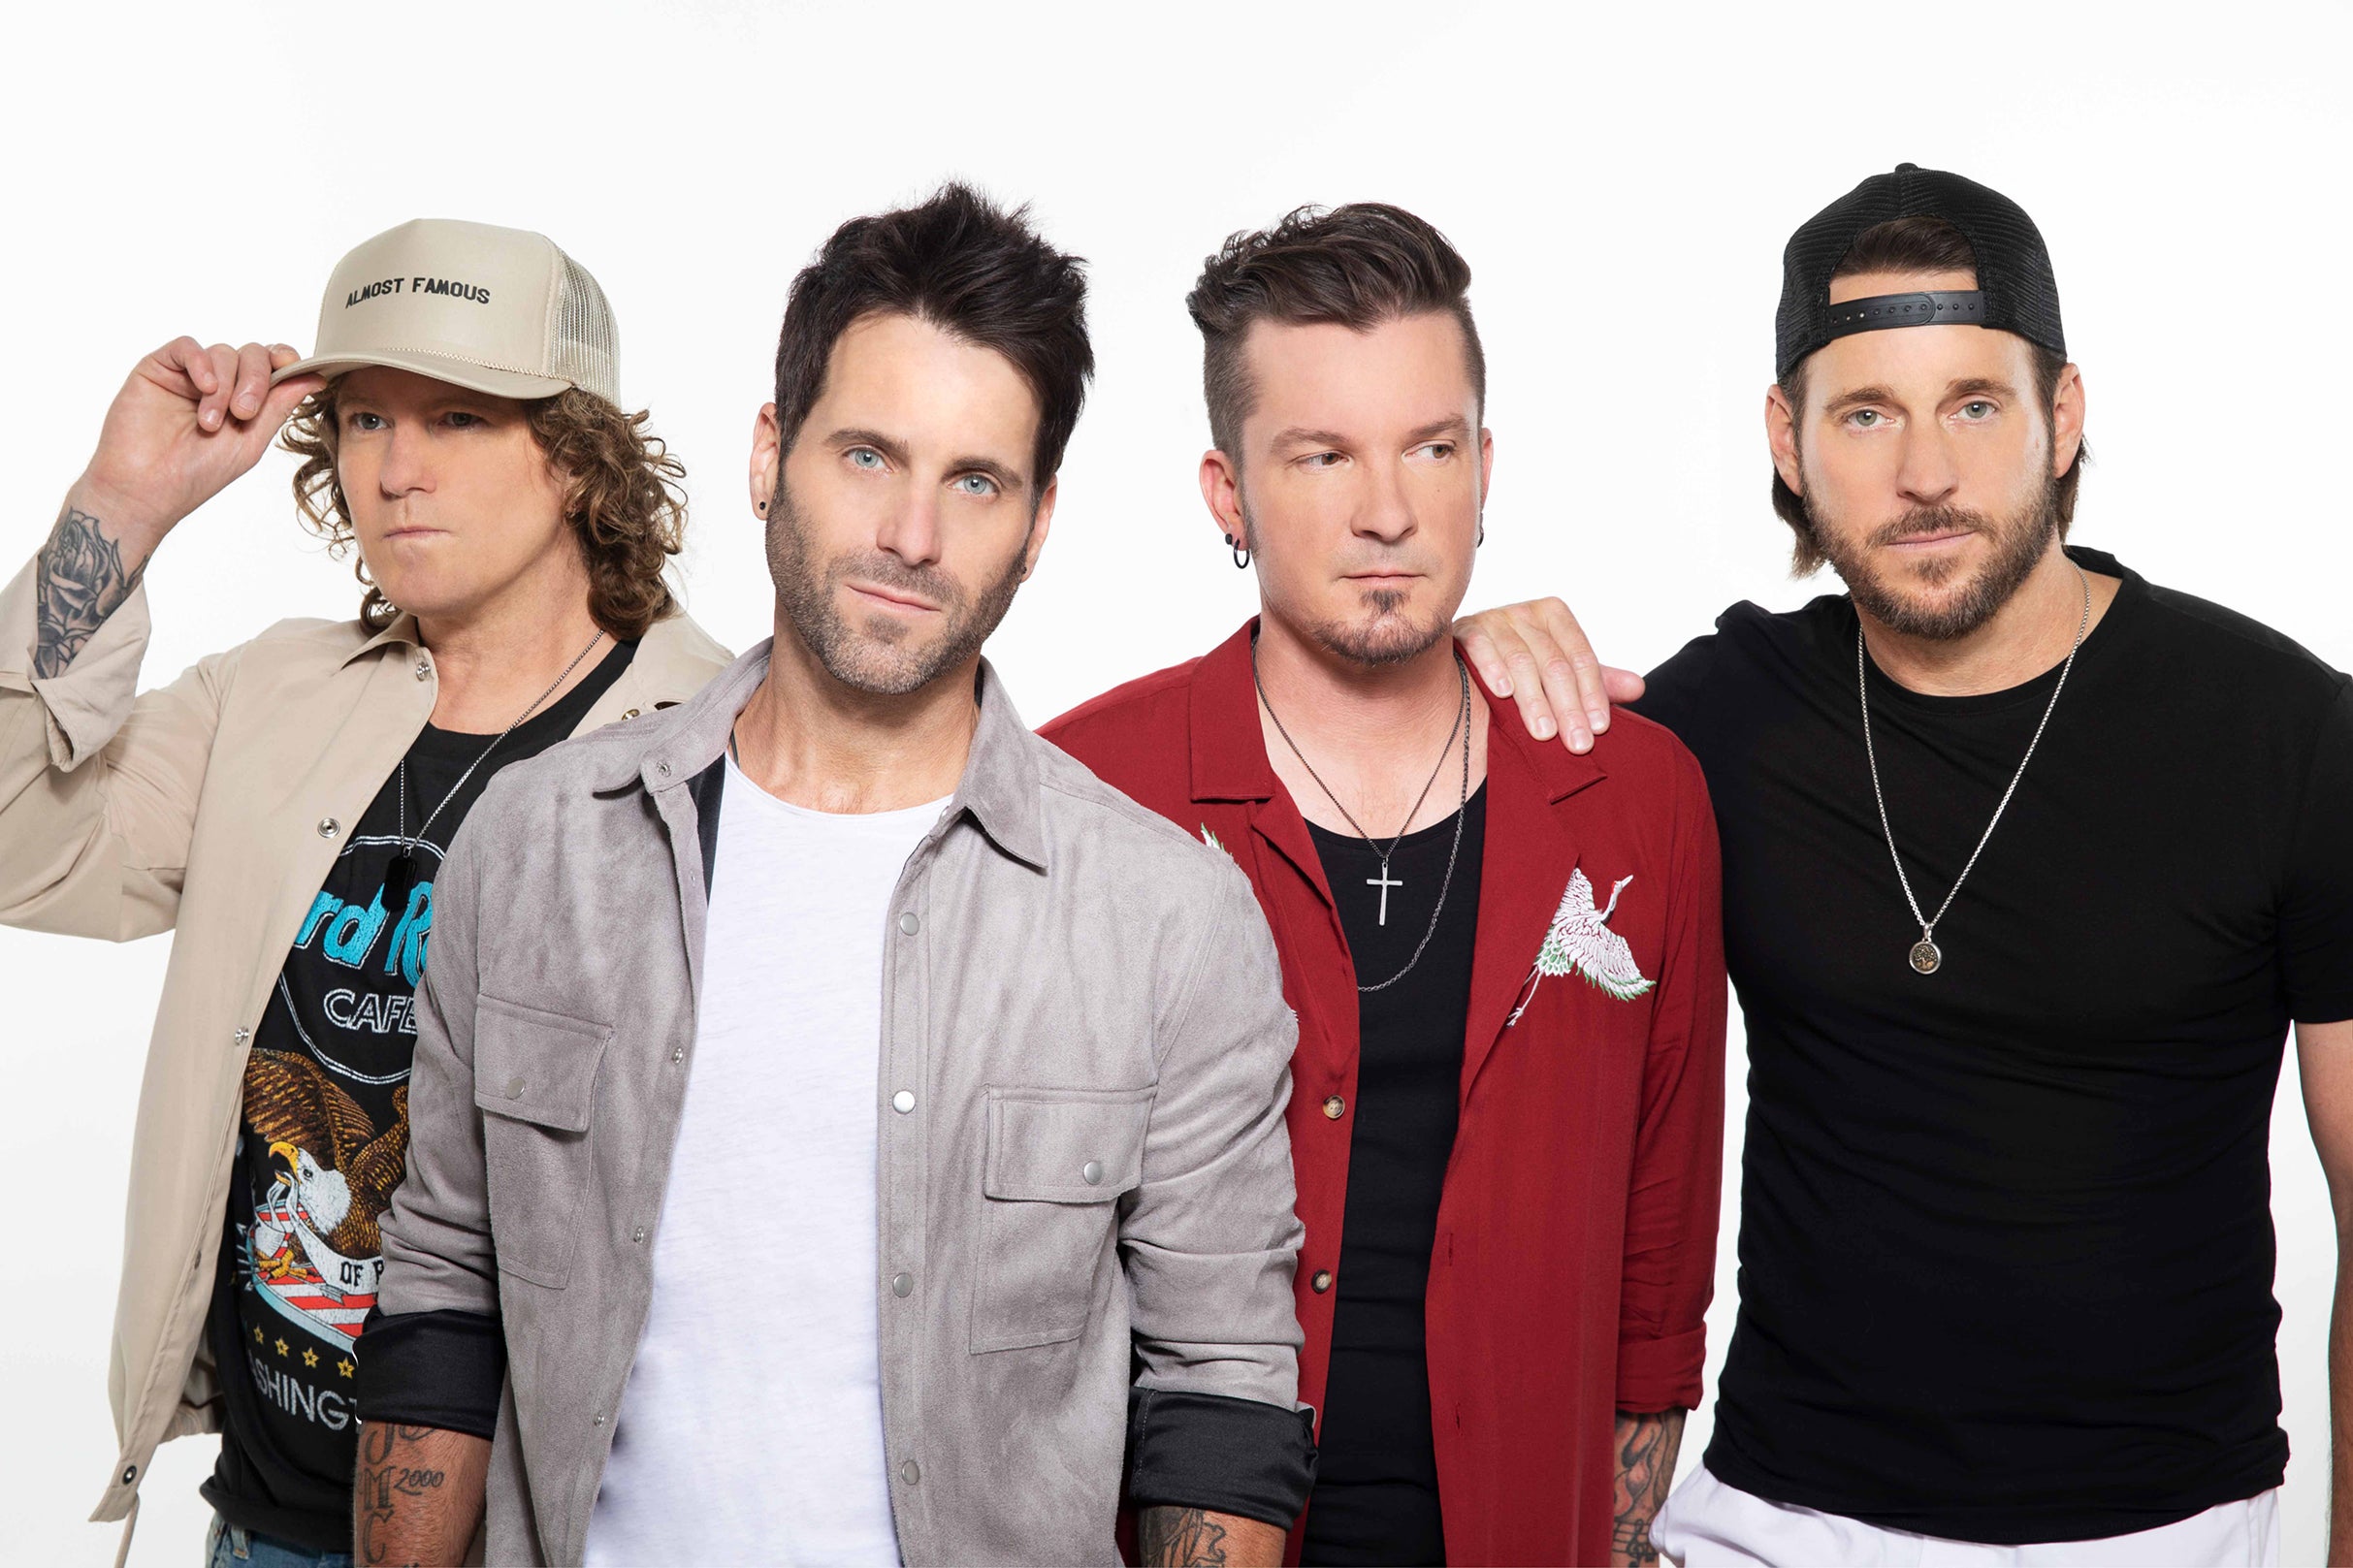 Parmalee in New York promo photo for Live Nation Mobile App presale offer code